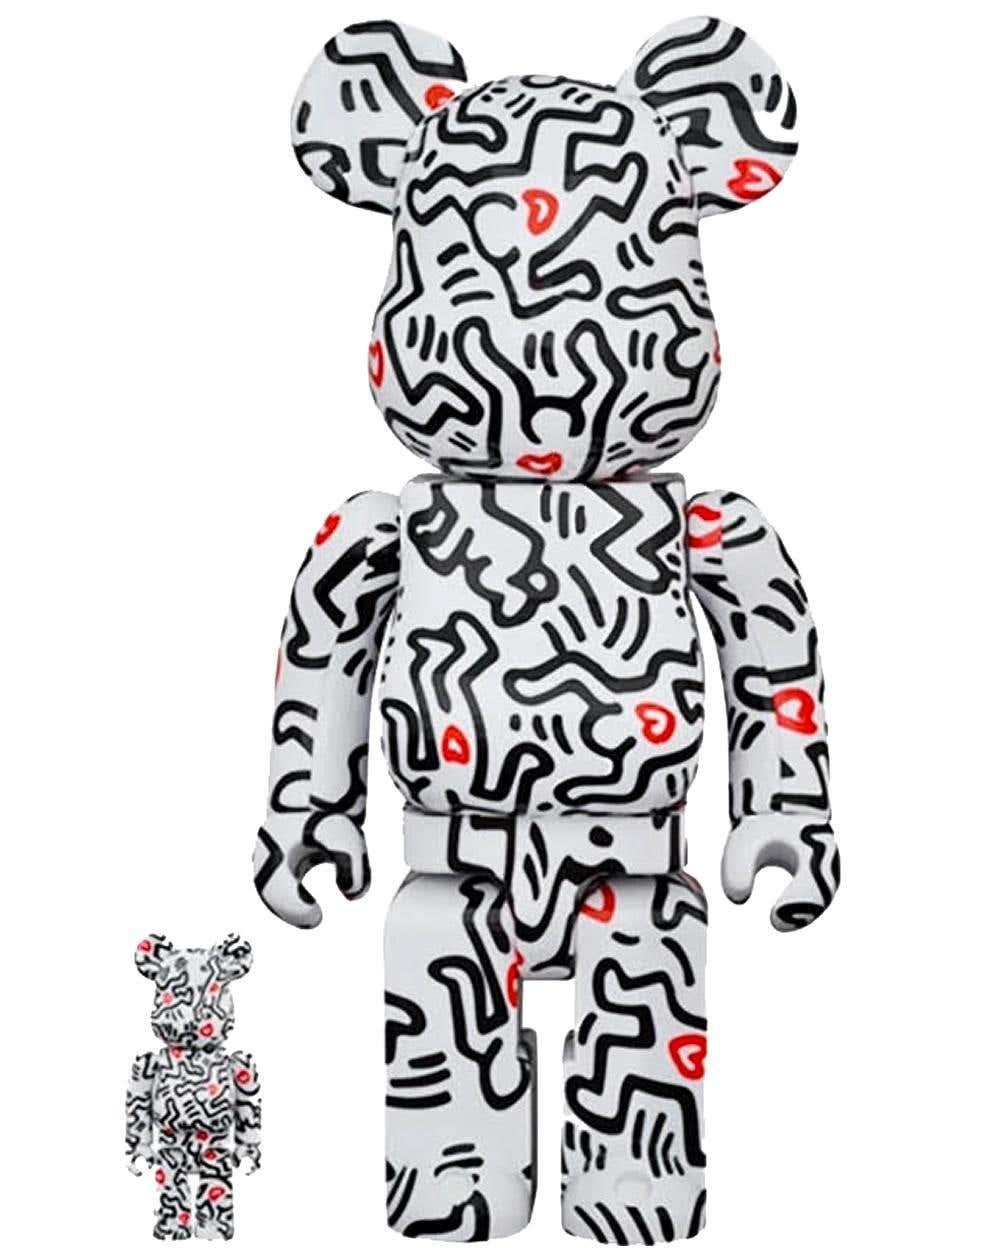 Jean-Michel Basquiat & Keith Haring  400% Bearbrick Vinyl Figures: Set of two individual works:

Unique, timeless collectibles trademarked & licensed by the Estate of Jean-Michel Basquiat & Keith Haring (each respectively). The partnered